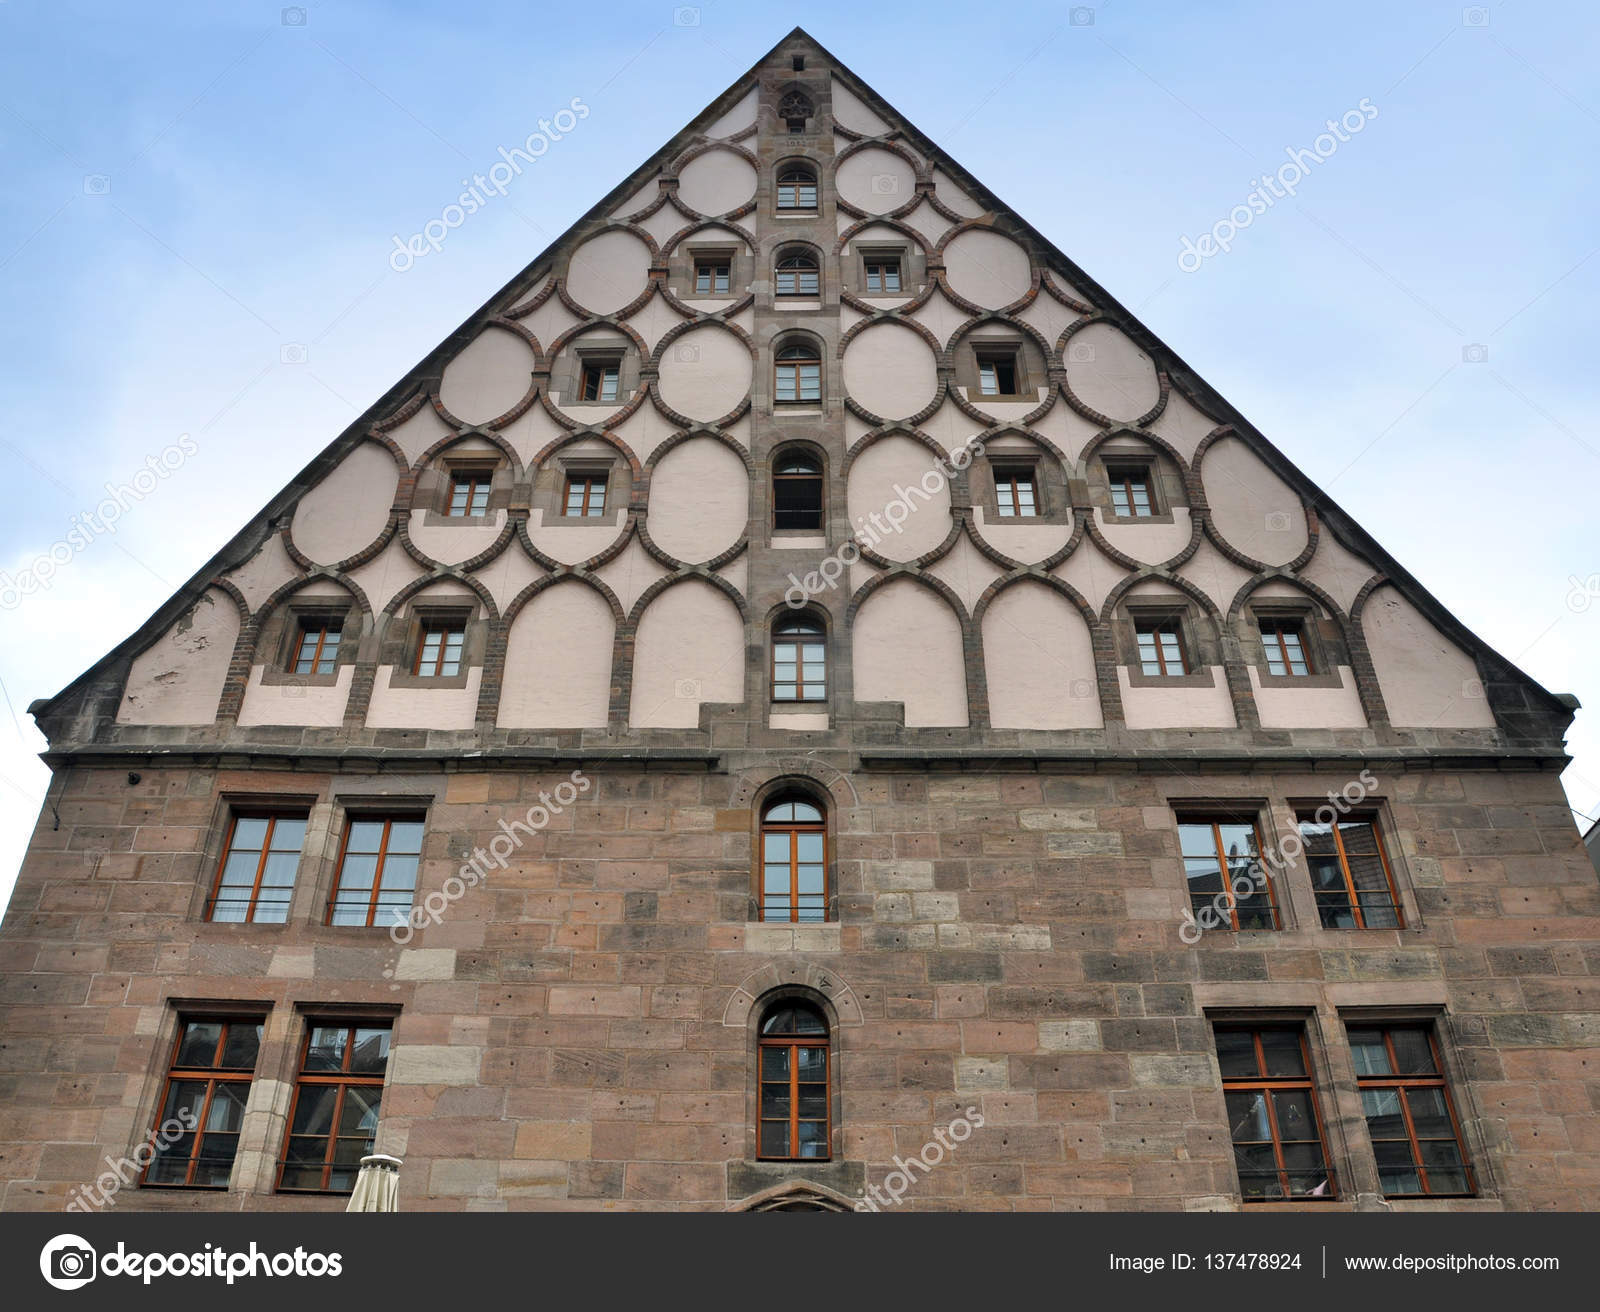 Old building in Nuremberg — Stock Photo © struvictory #137478924